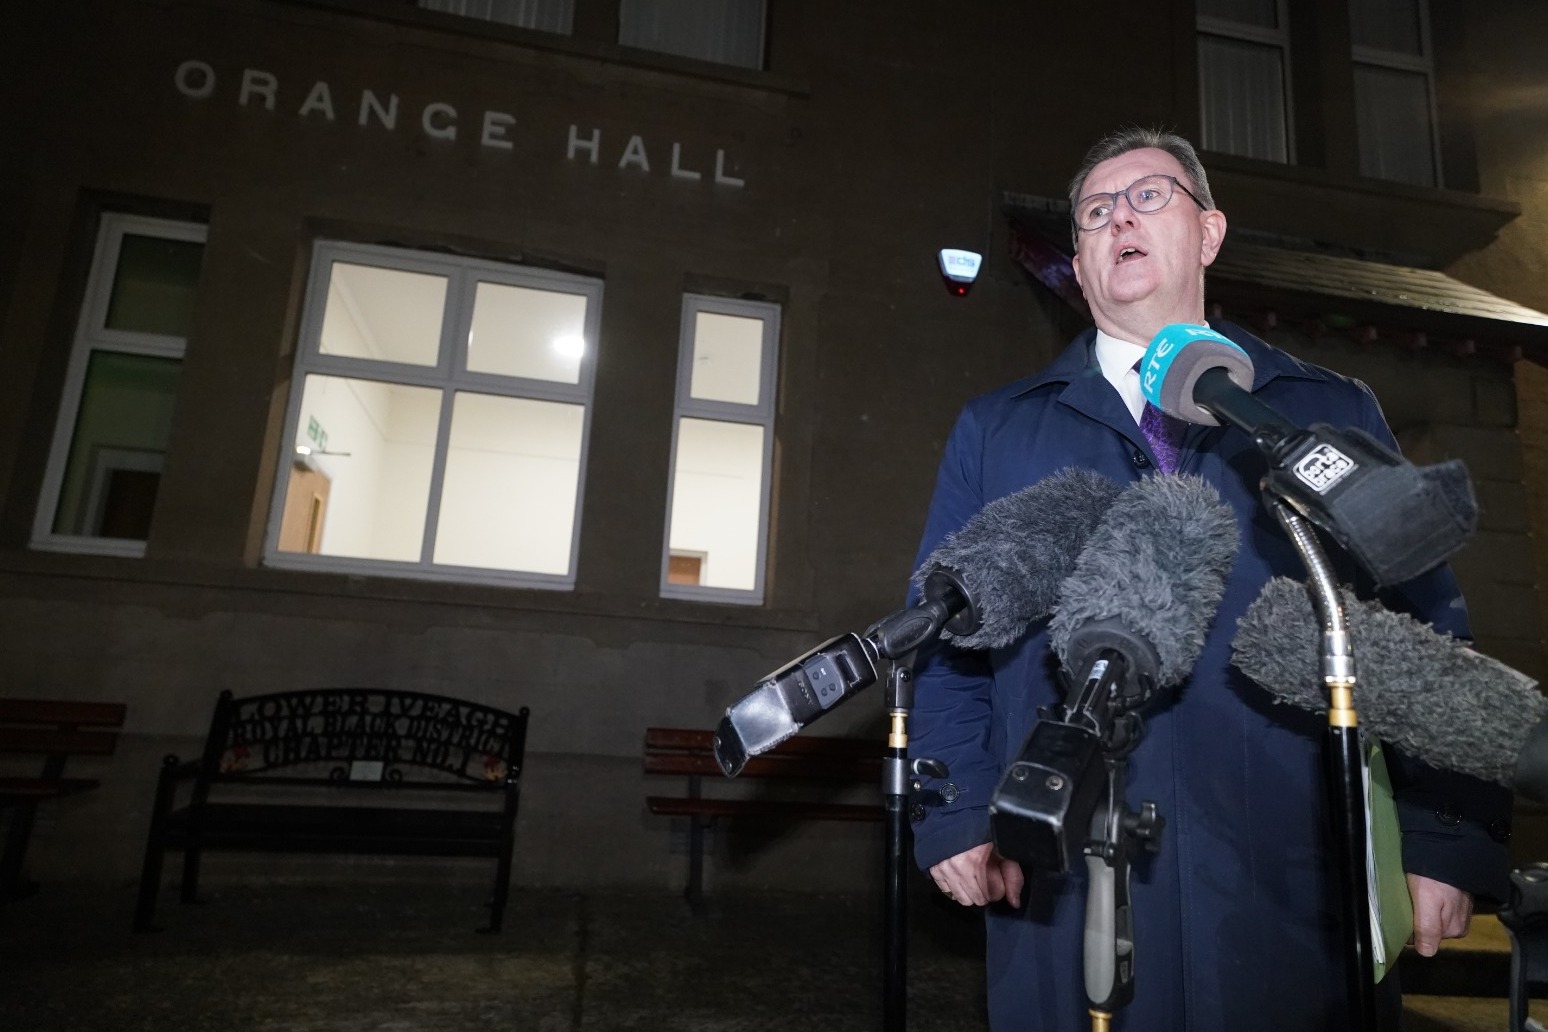 Little chance of progress over protocol before elections, DUP leader warns 